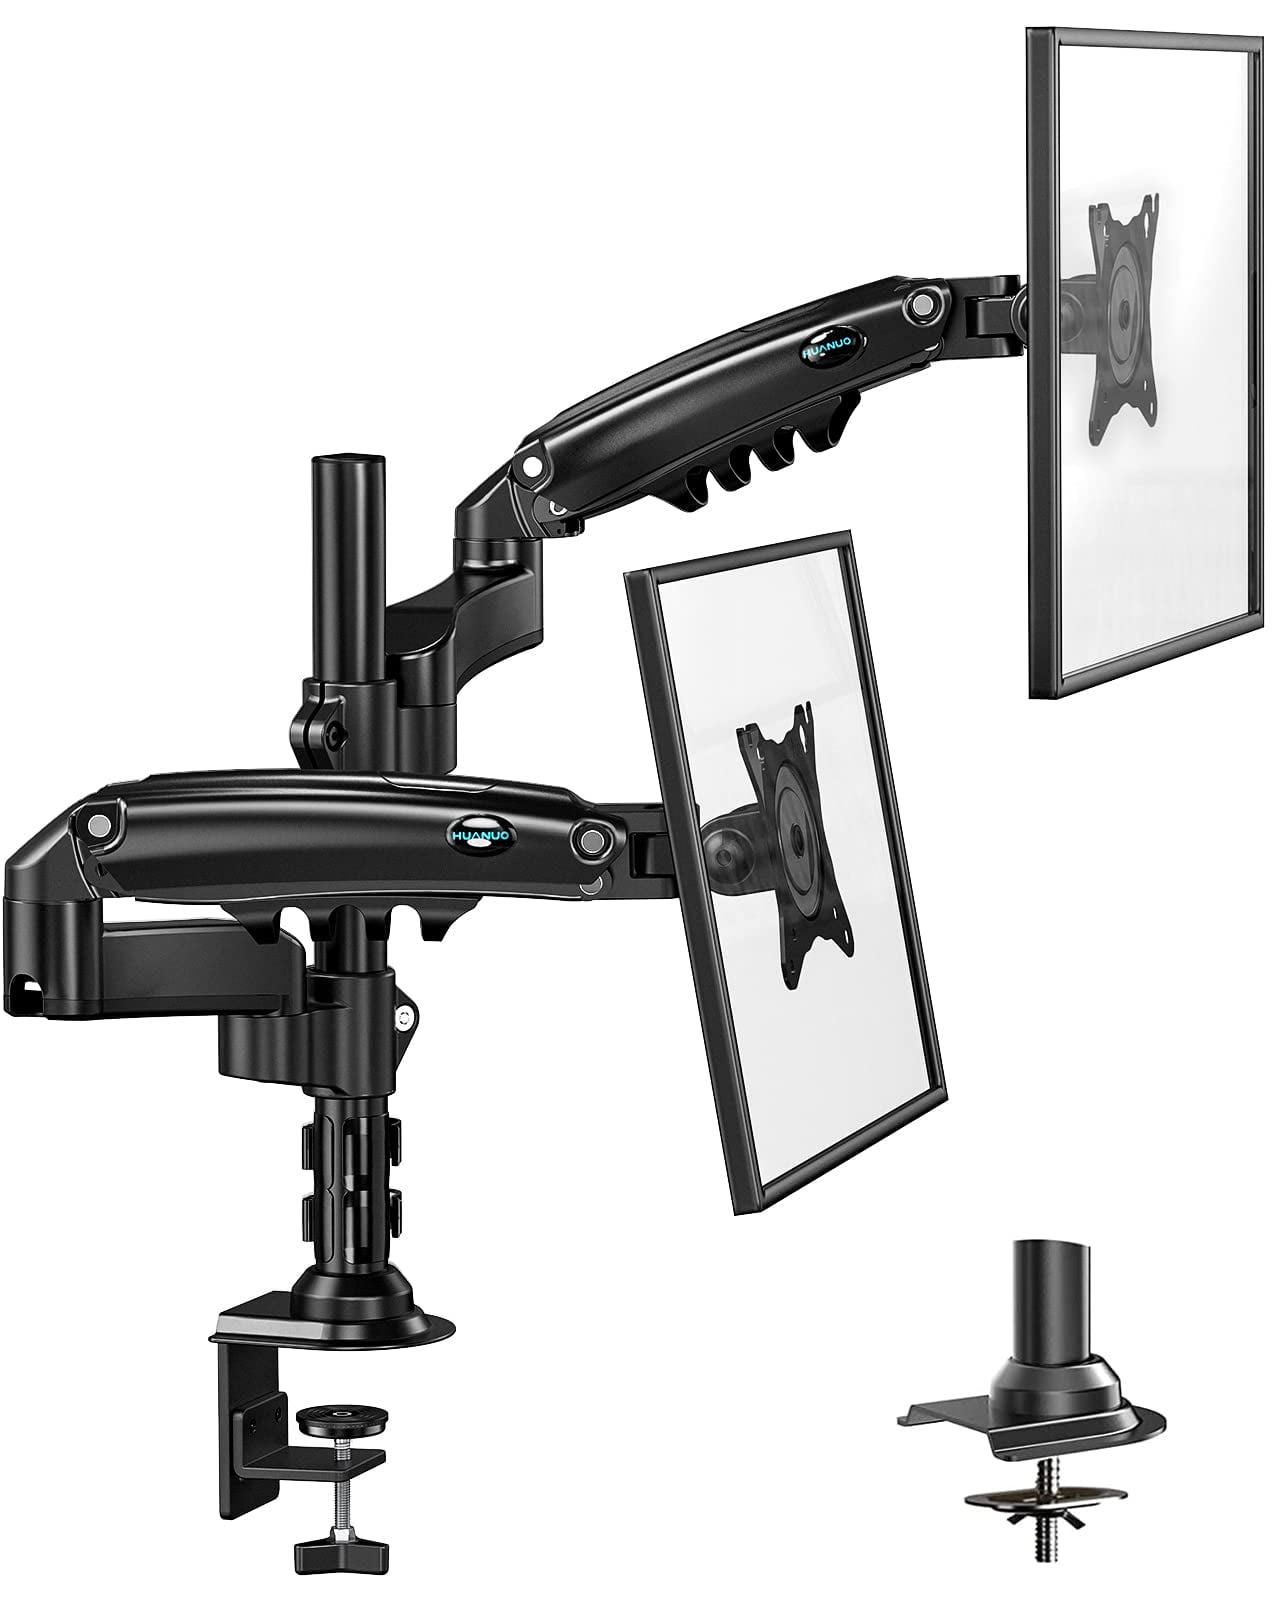 HUANUO Dual Monitor Stand Vertical Stack Screen Support Two 17 to 32 Inch Computer Monitors with C Clamp Grommet Base 